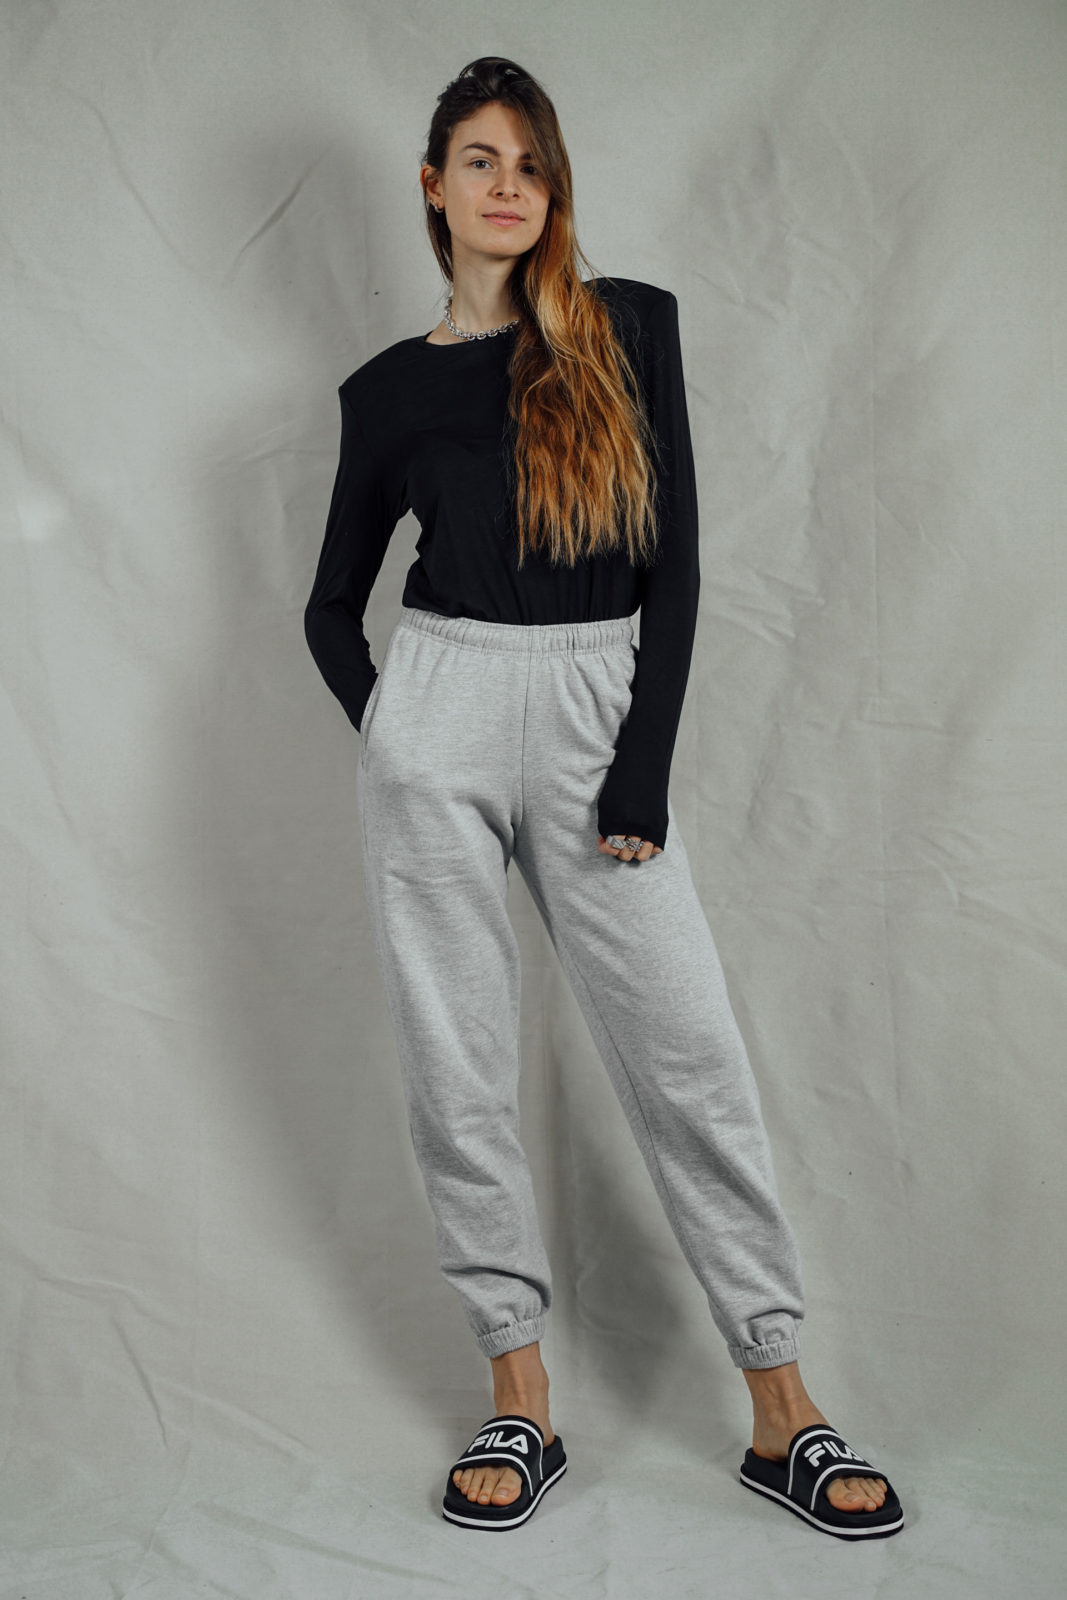 New Year's Eve outfit ideas: how to style your sweatpants for NYE